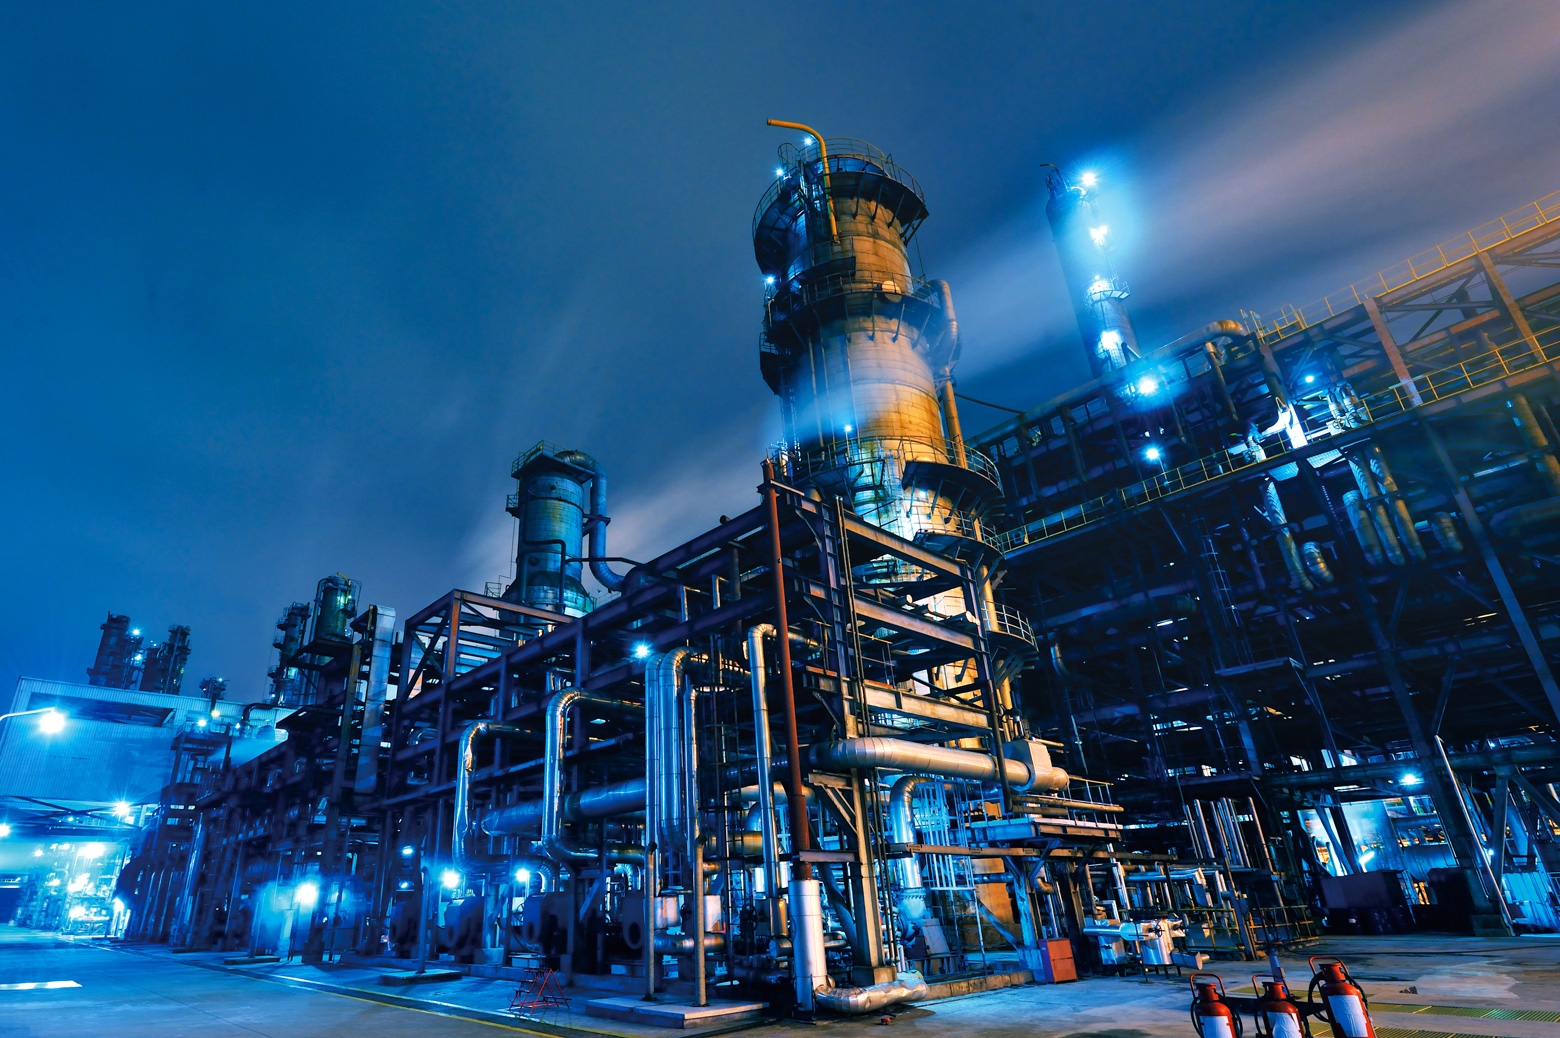 An oil refinery at night.